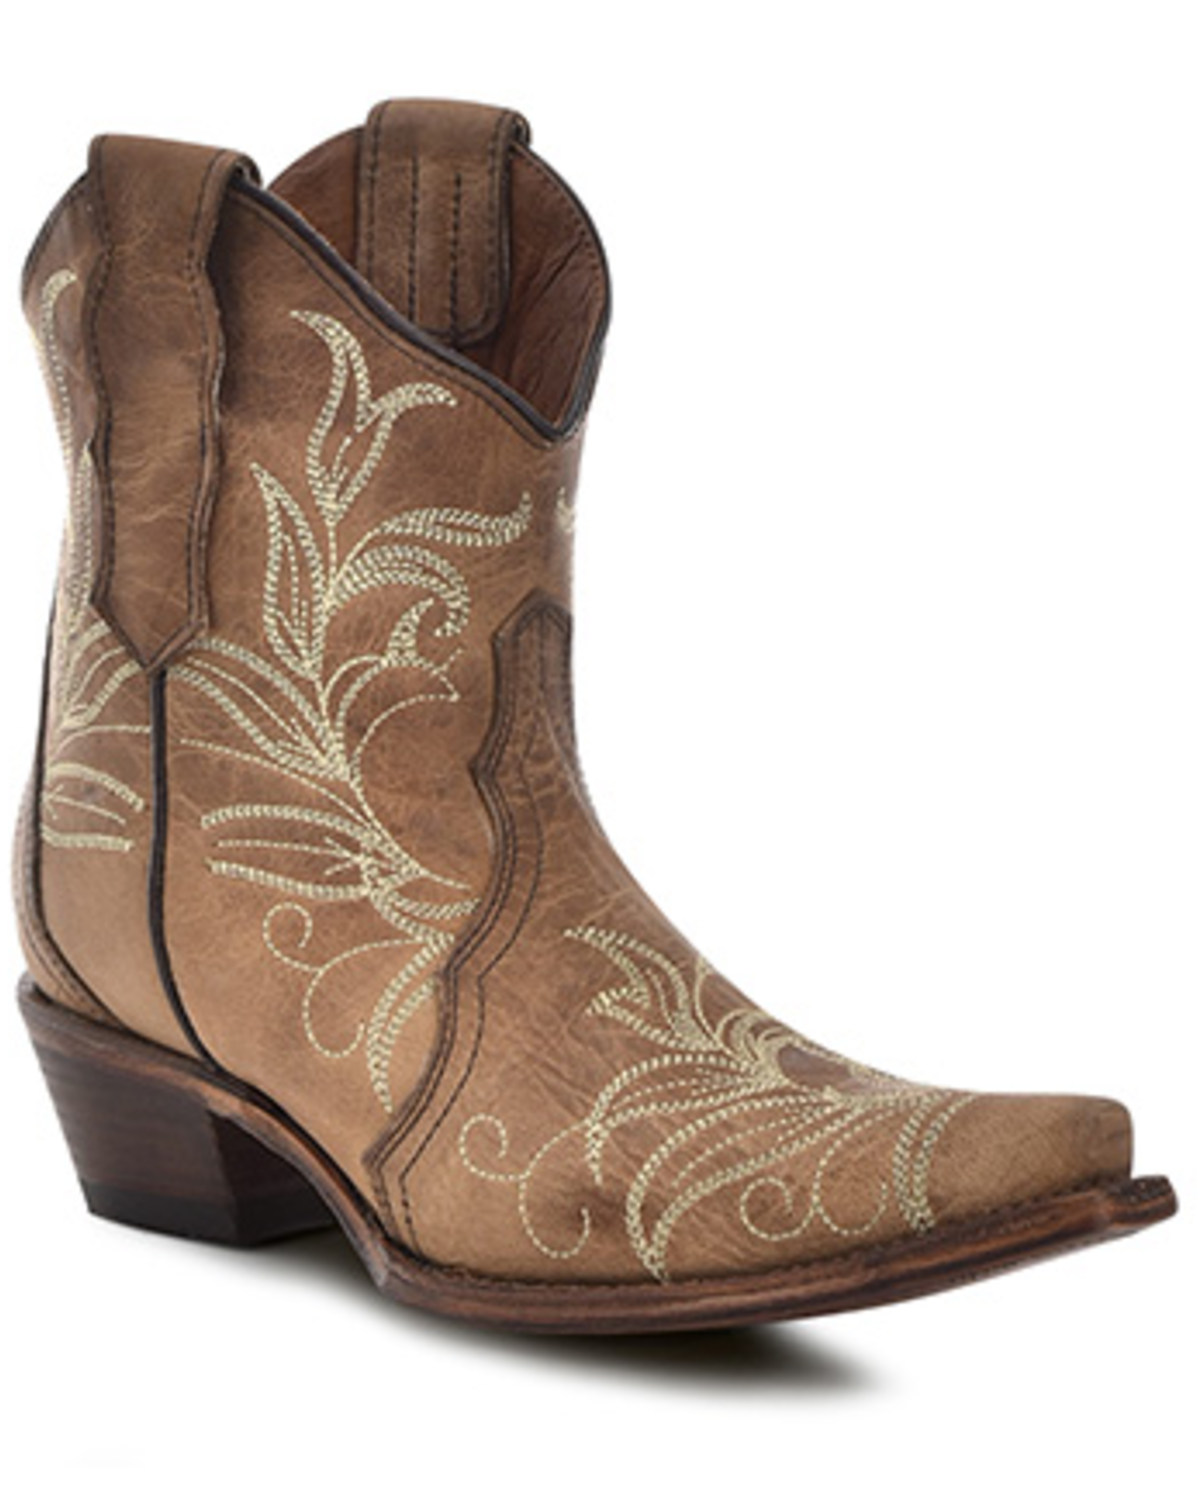 Corral Women's Embroidered Ankle Booties - Snip Toe